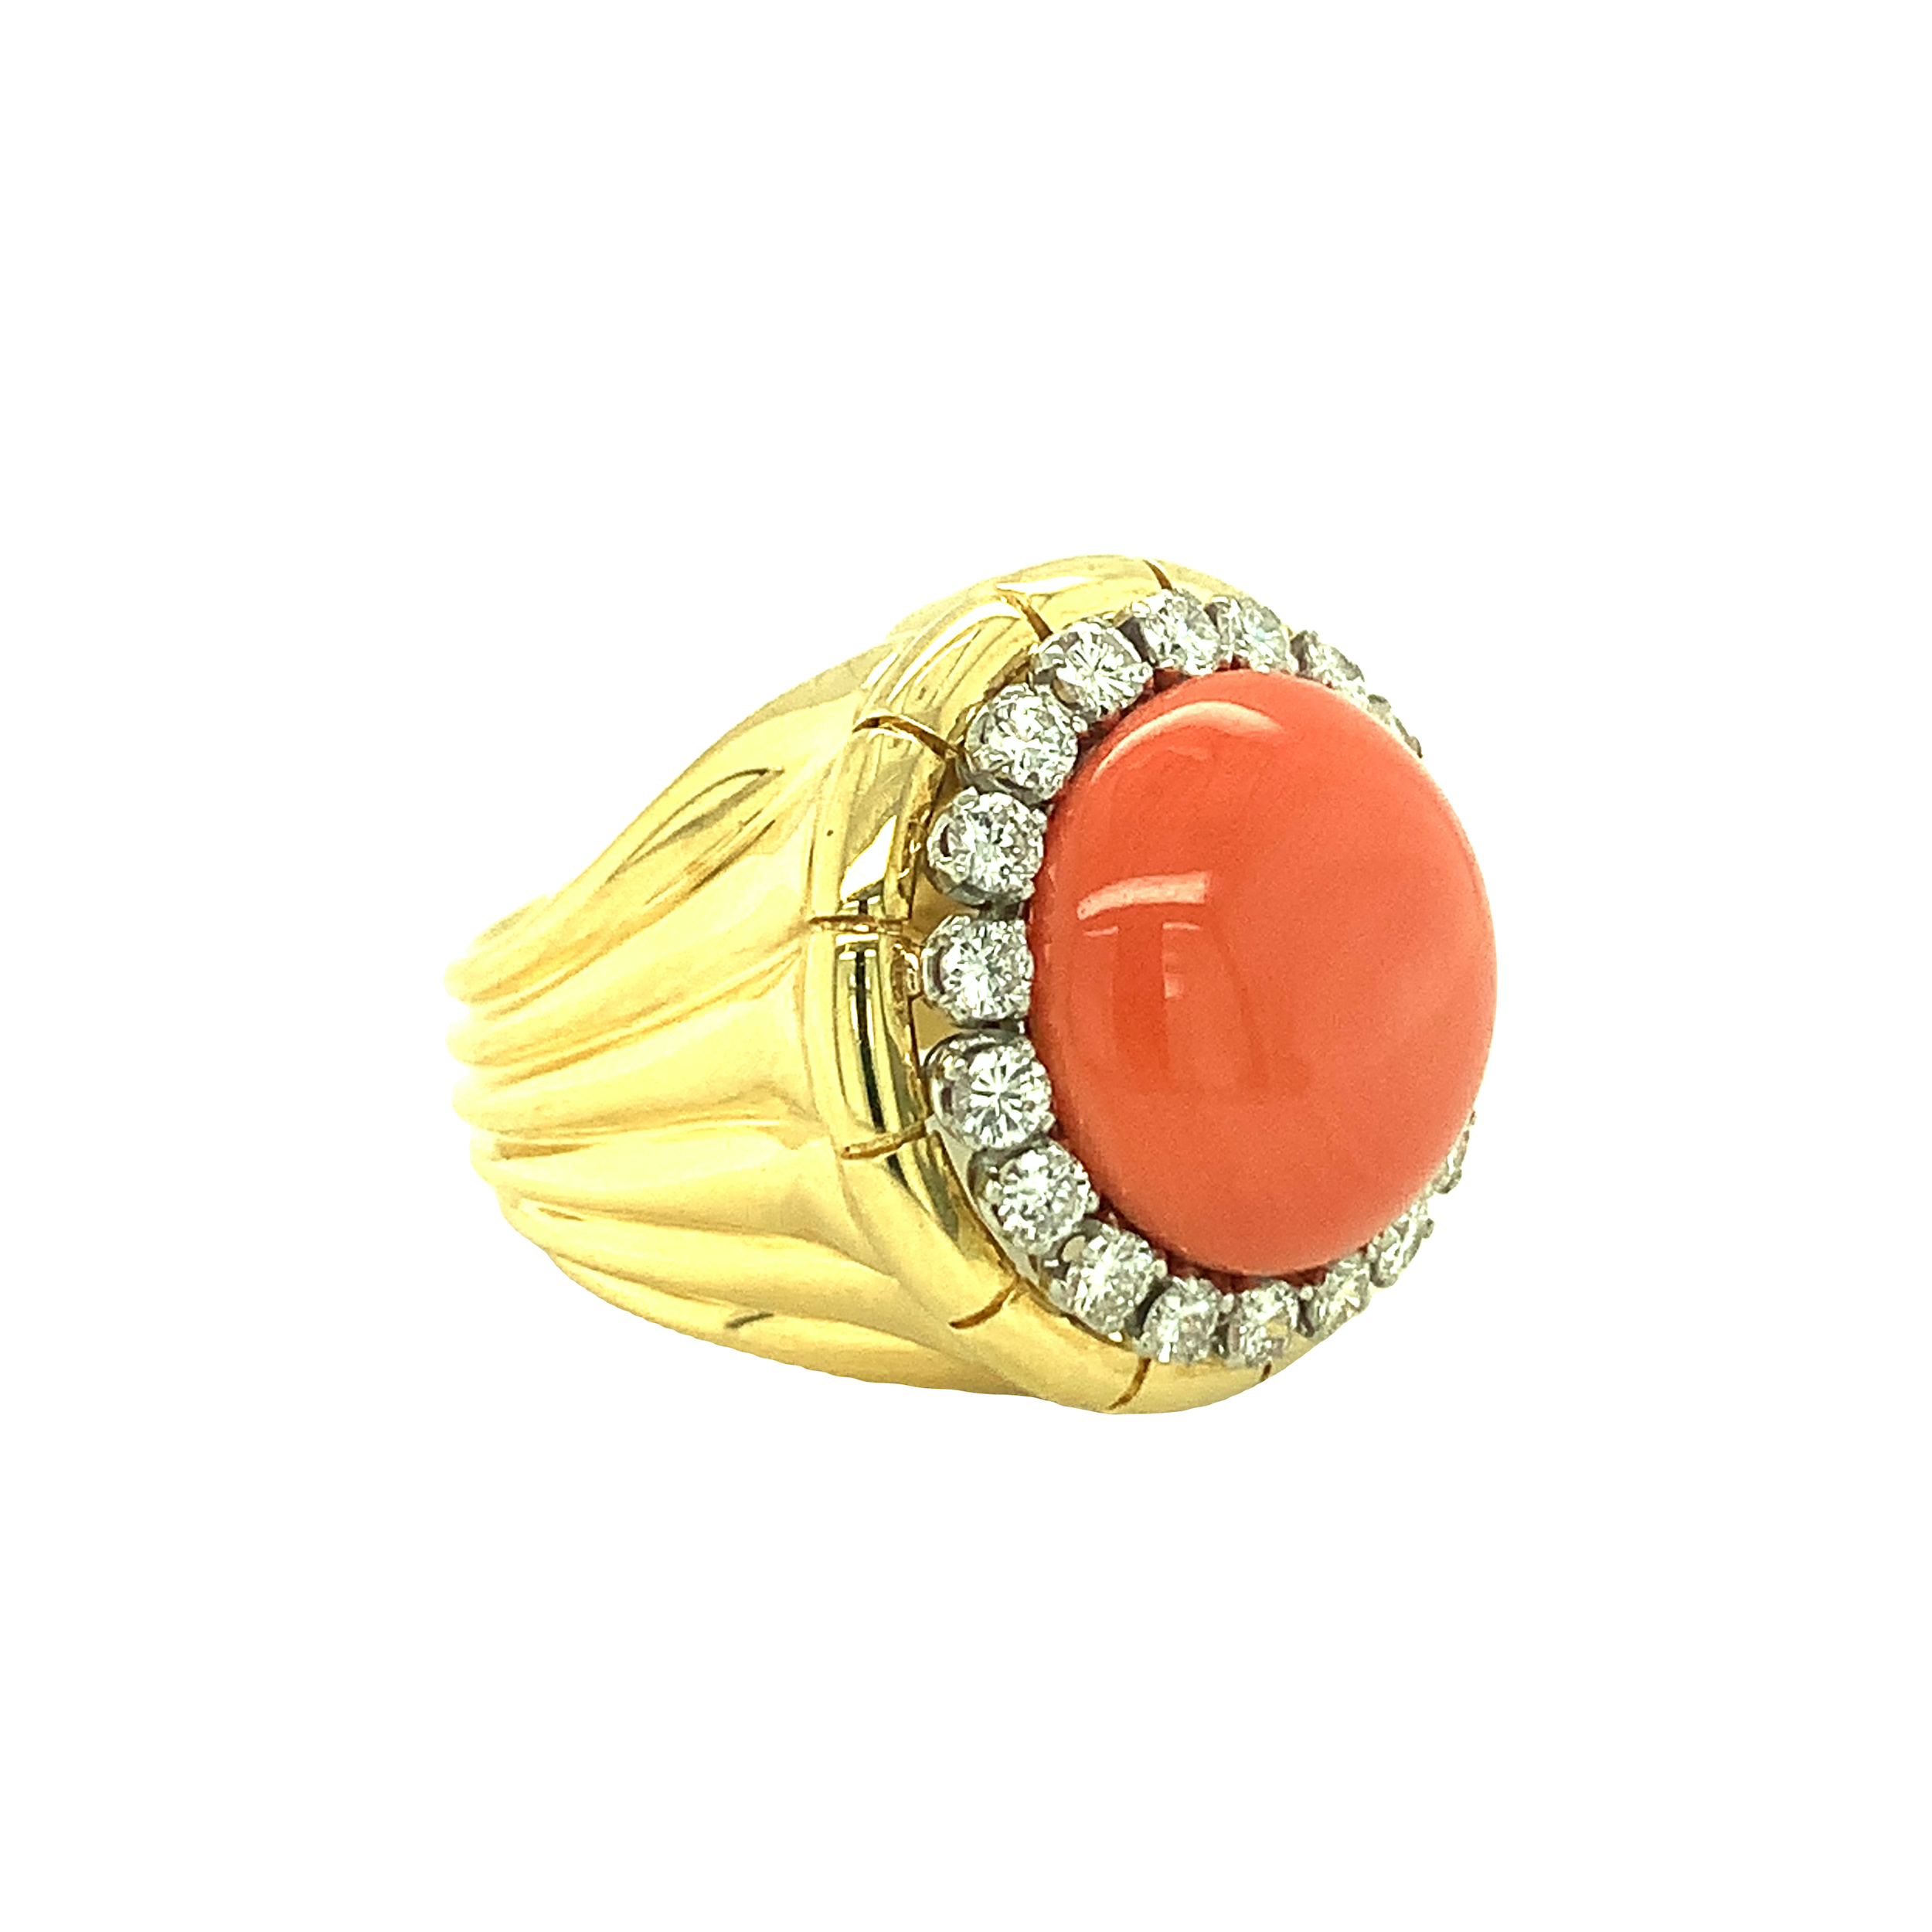 Best Place To Buy Natural, Certified Coral Gemstone | by Coral Gemstone |  Medium